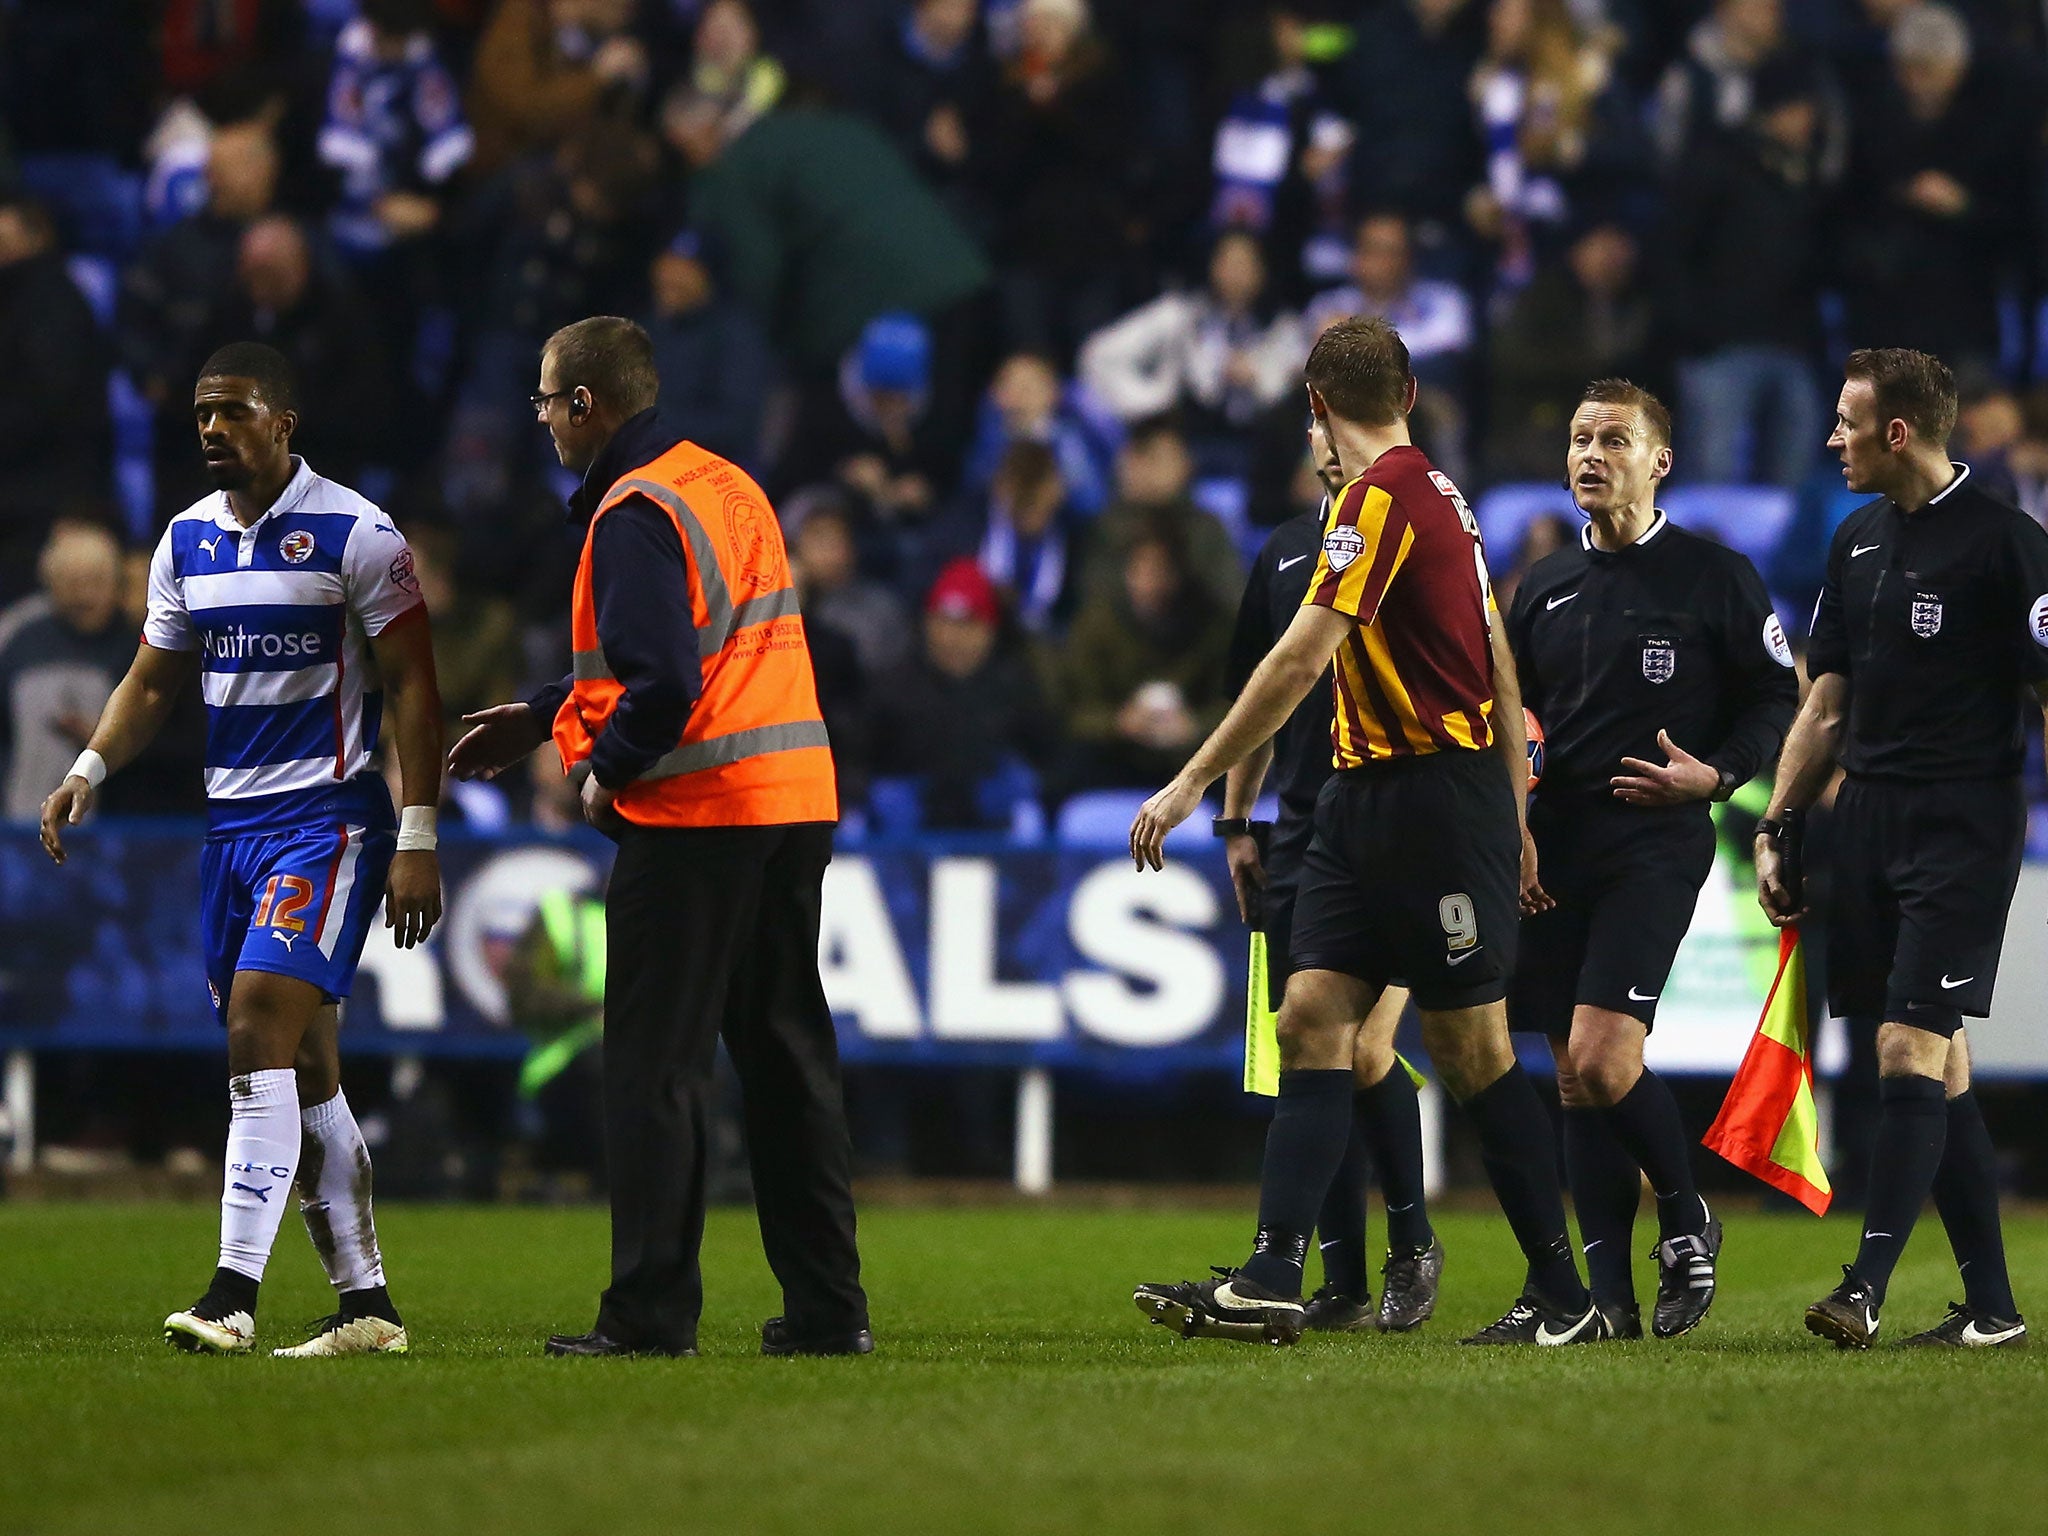 Garath McCleary walks off the pitch at half-time